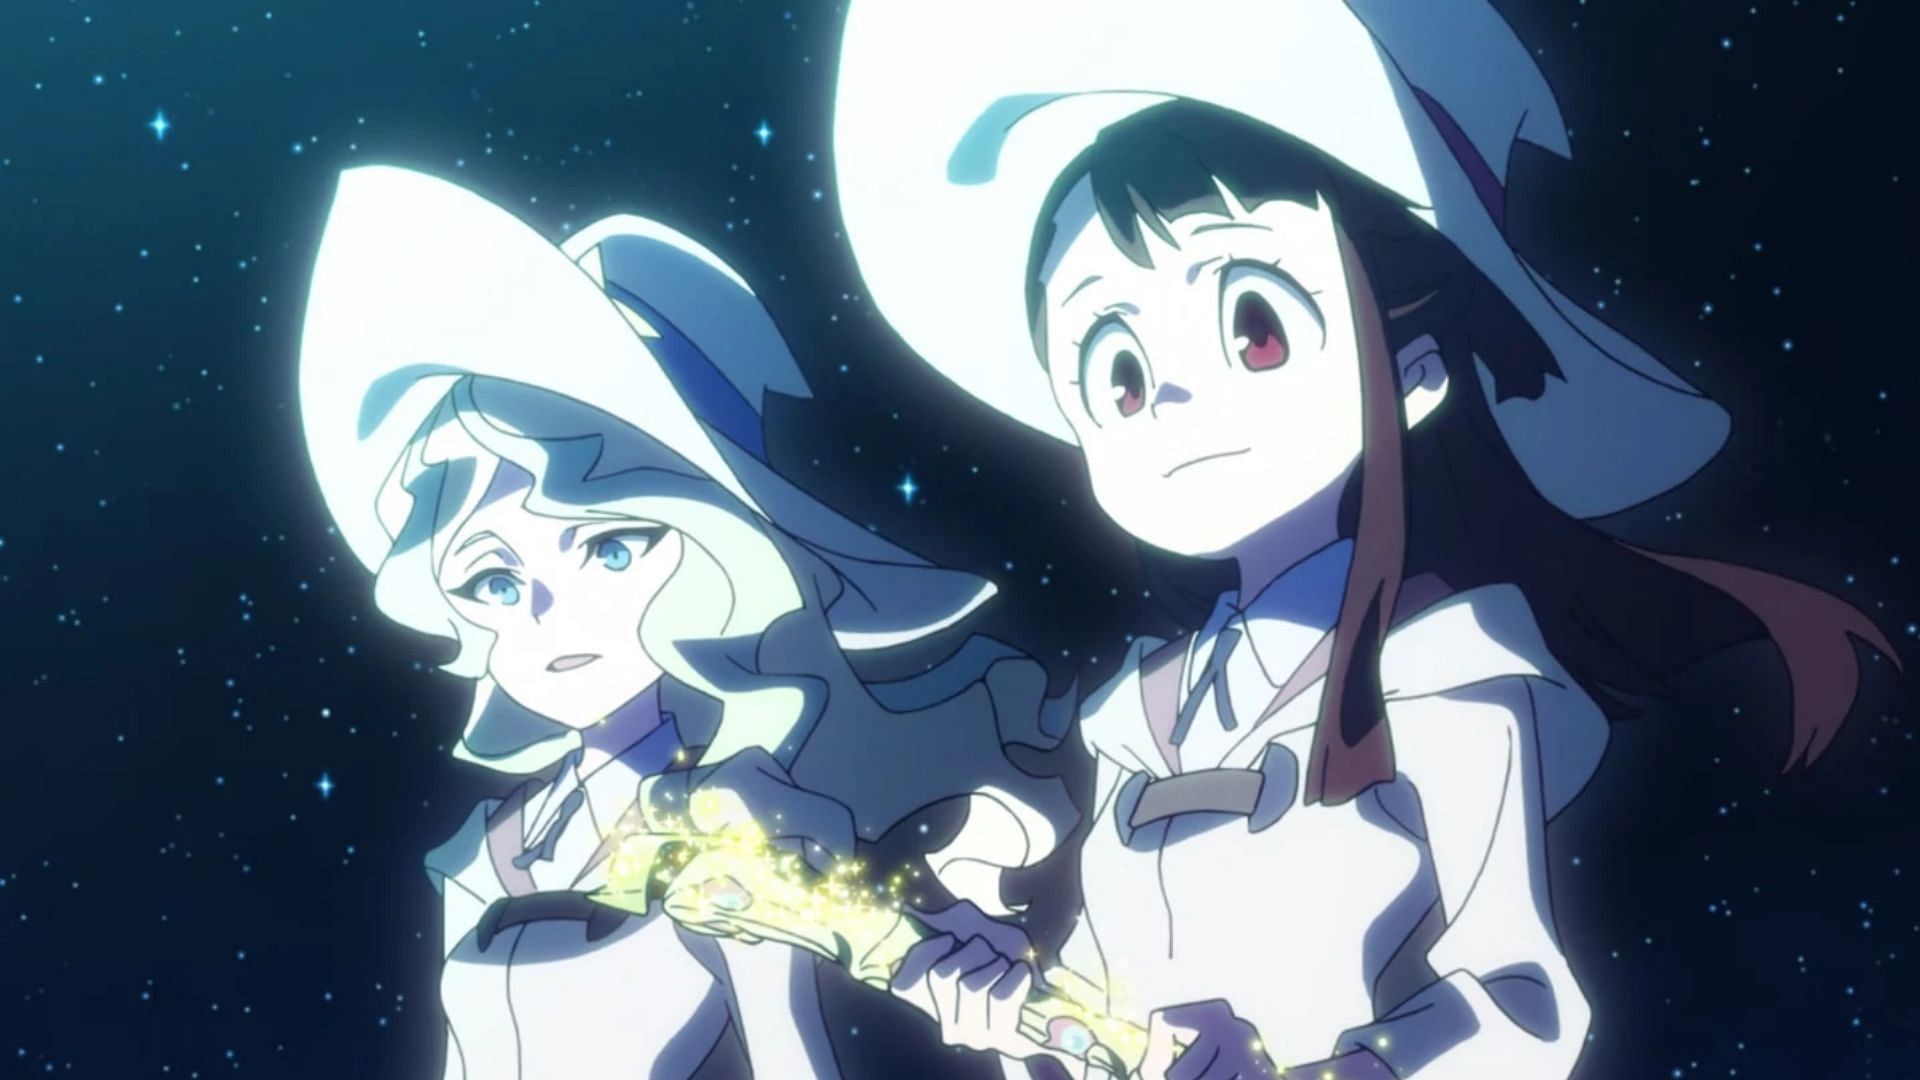 One of the more underrated anime rivalries, featuring Diana on the left, and Akko on the right (Image via Trigger)